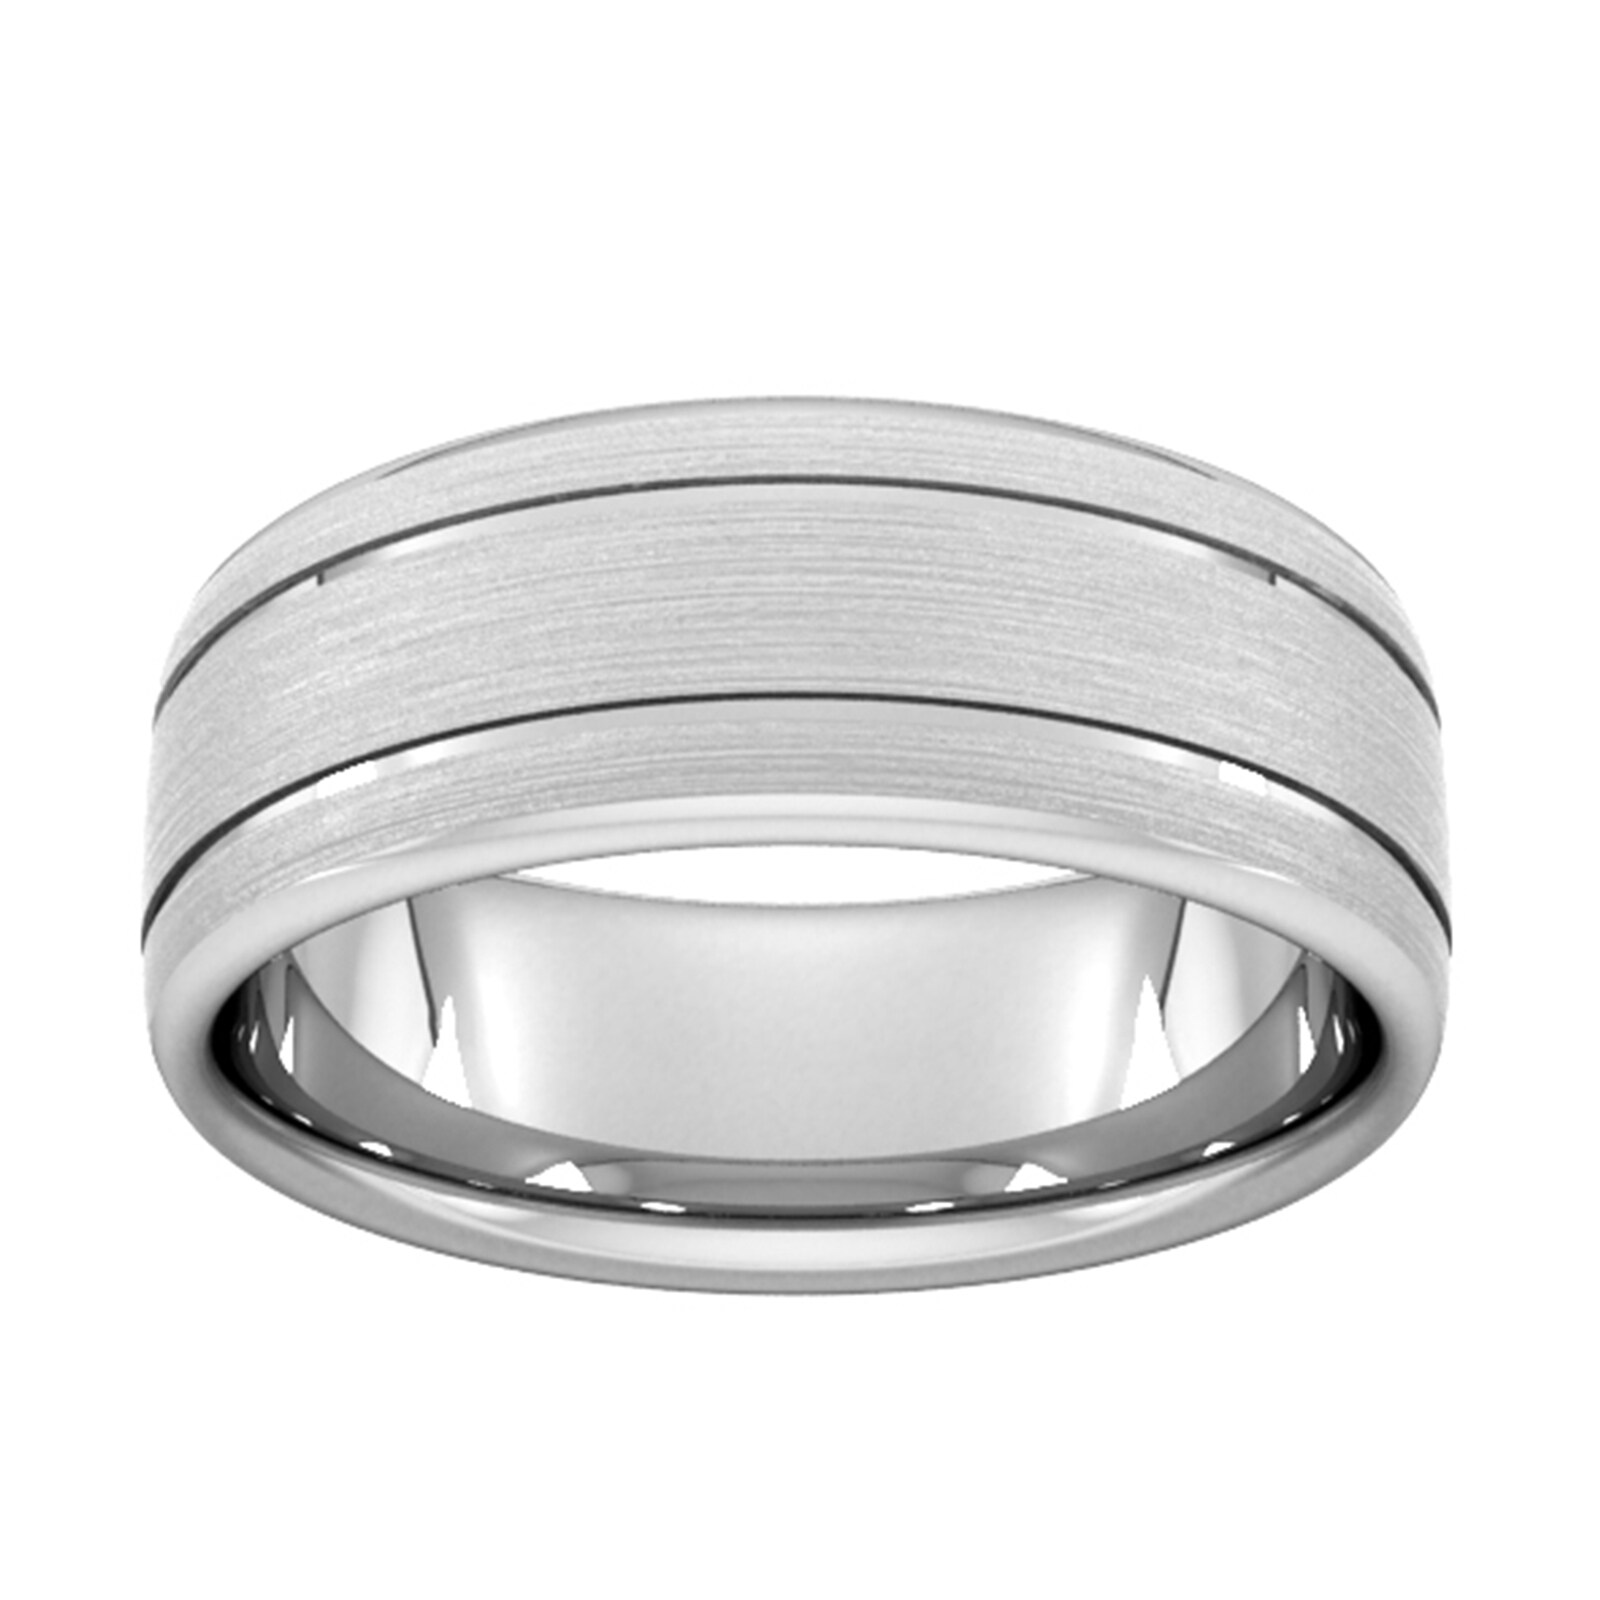 8mm D Shape Standard Matt Finish With Double Grooves Wedding Ring In Platinum - Ring Size M